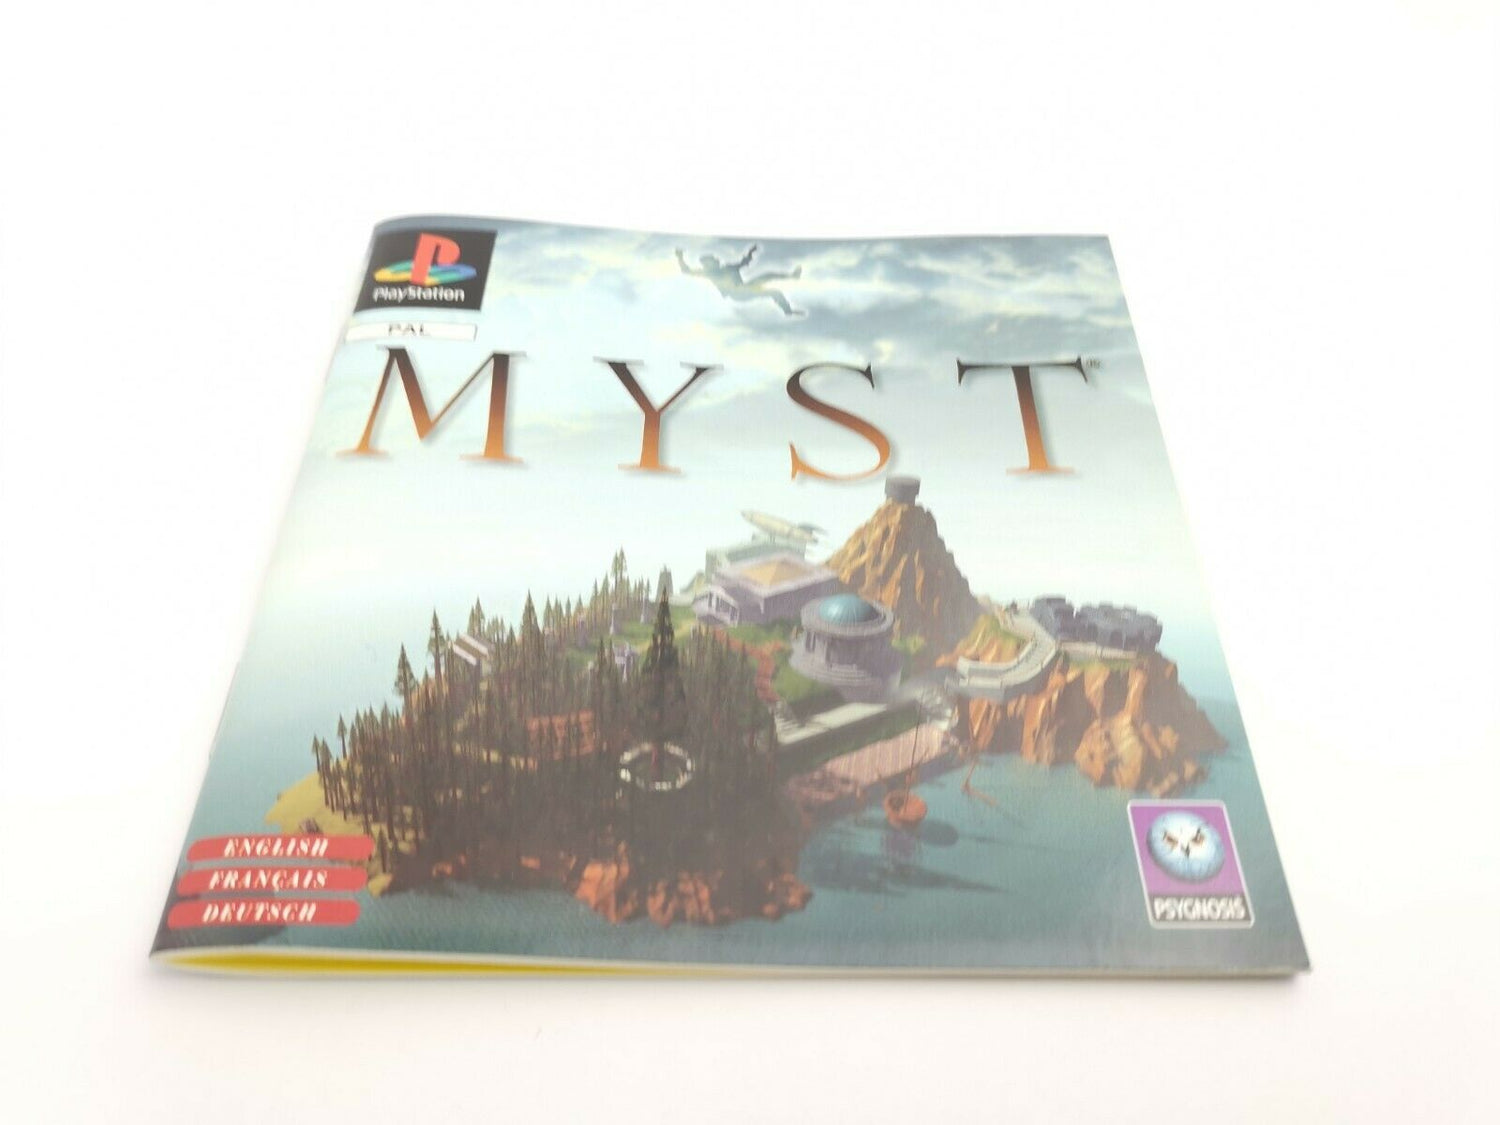 Sony Playstation 1 game 